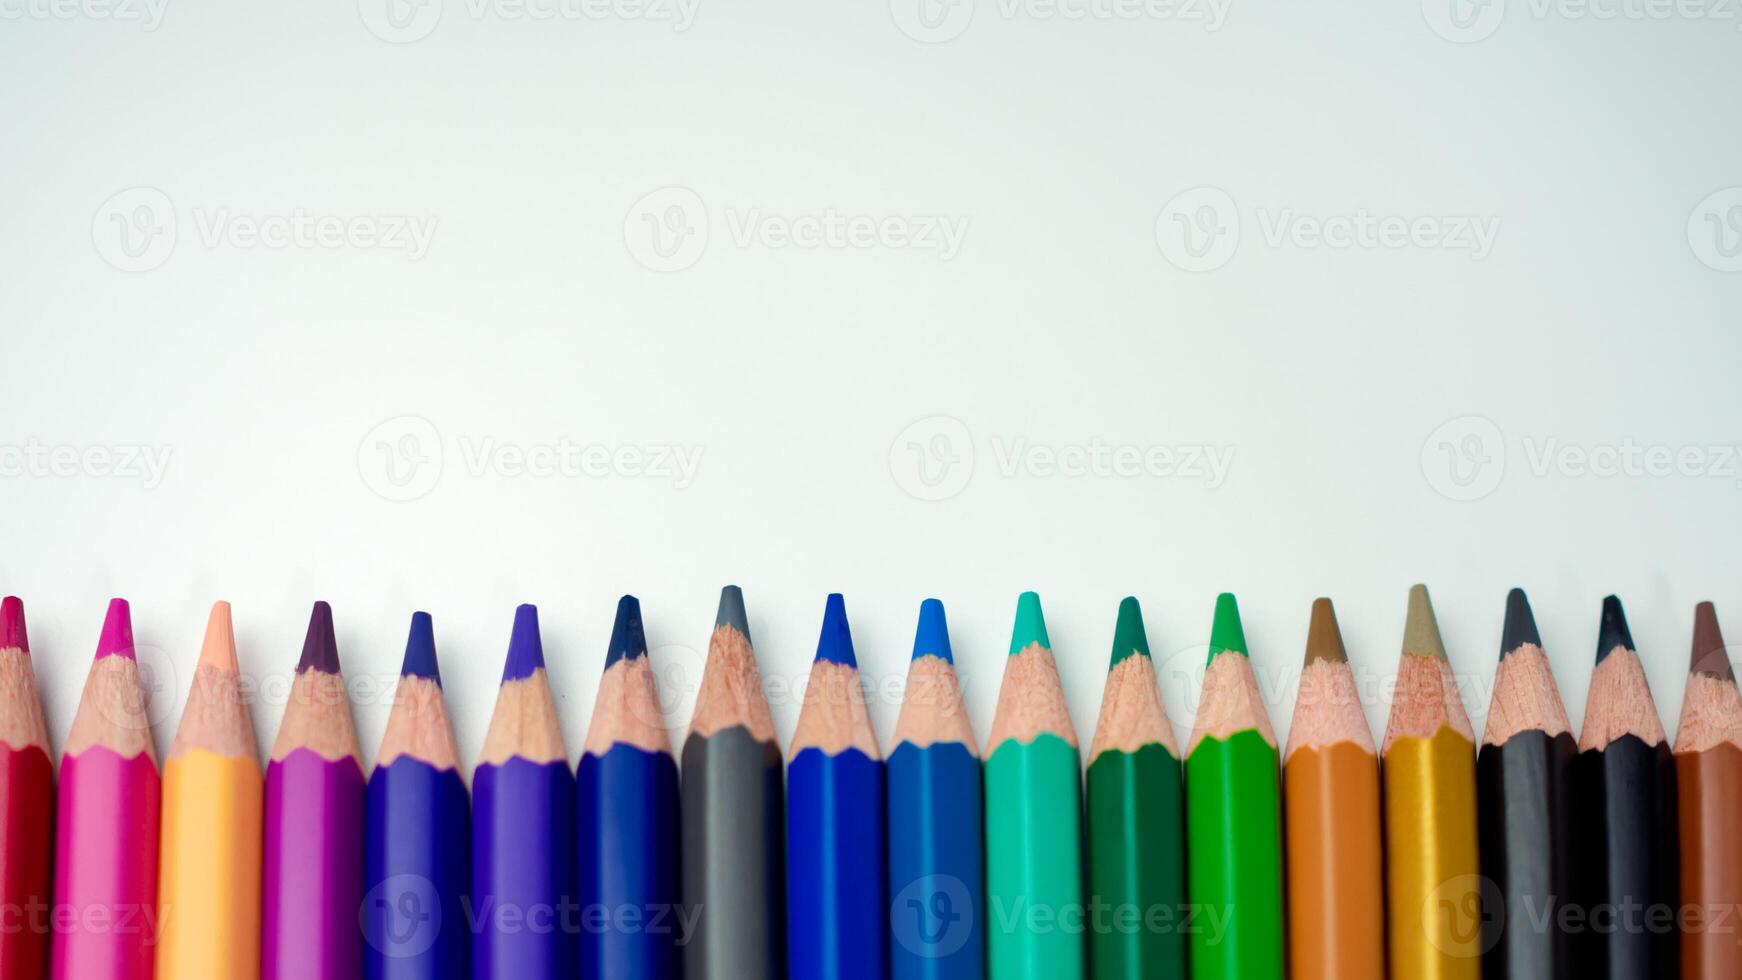 Set of colored pencils on a white background That is arranged in a bar graph, Color pencils on white background, Close up, seamless colored pencils row with wave on lower side, line pencils. photo